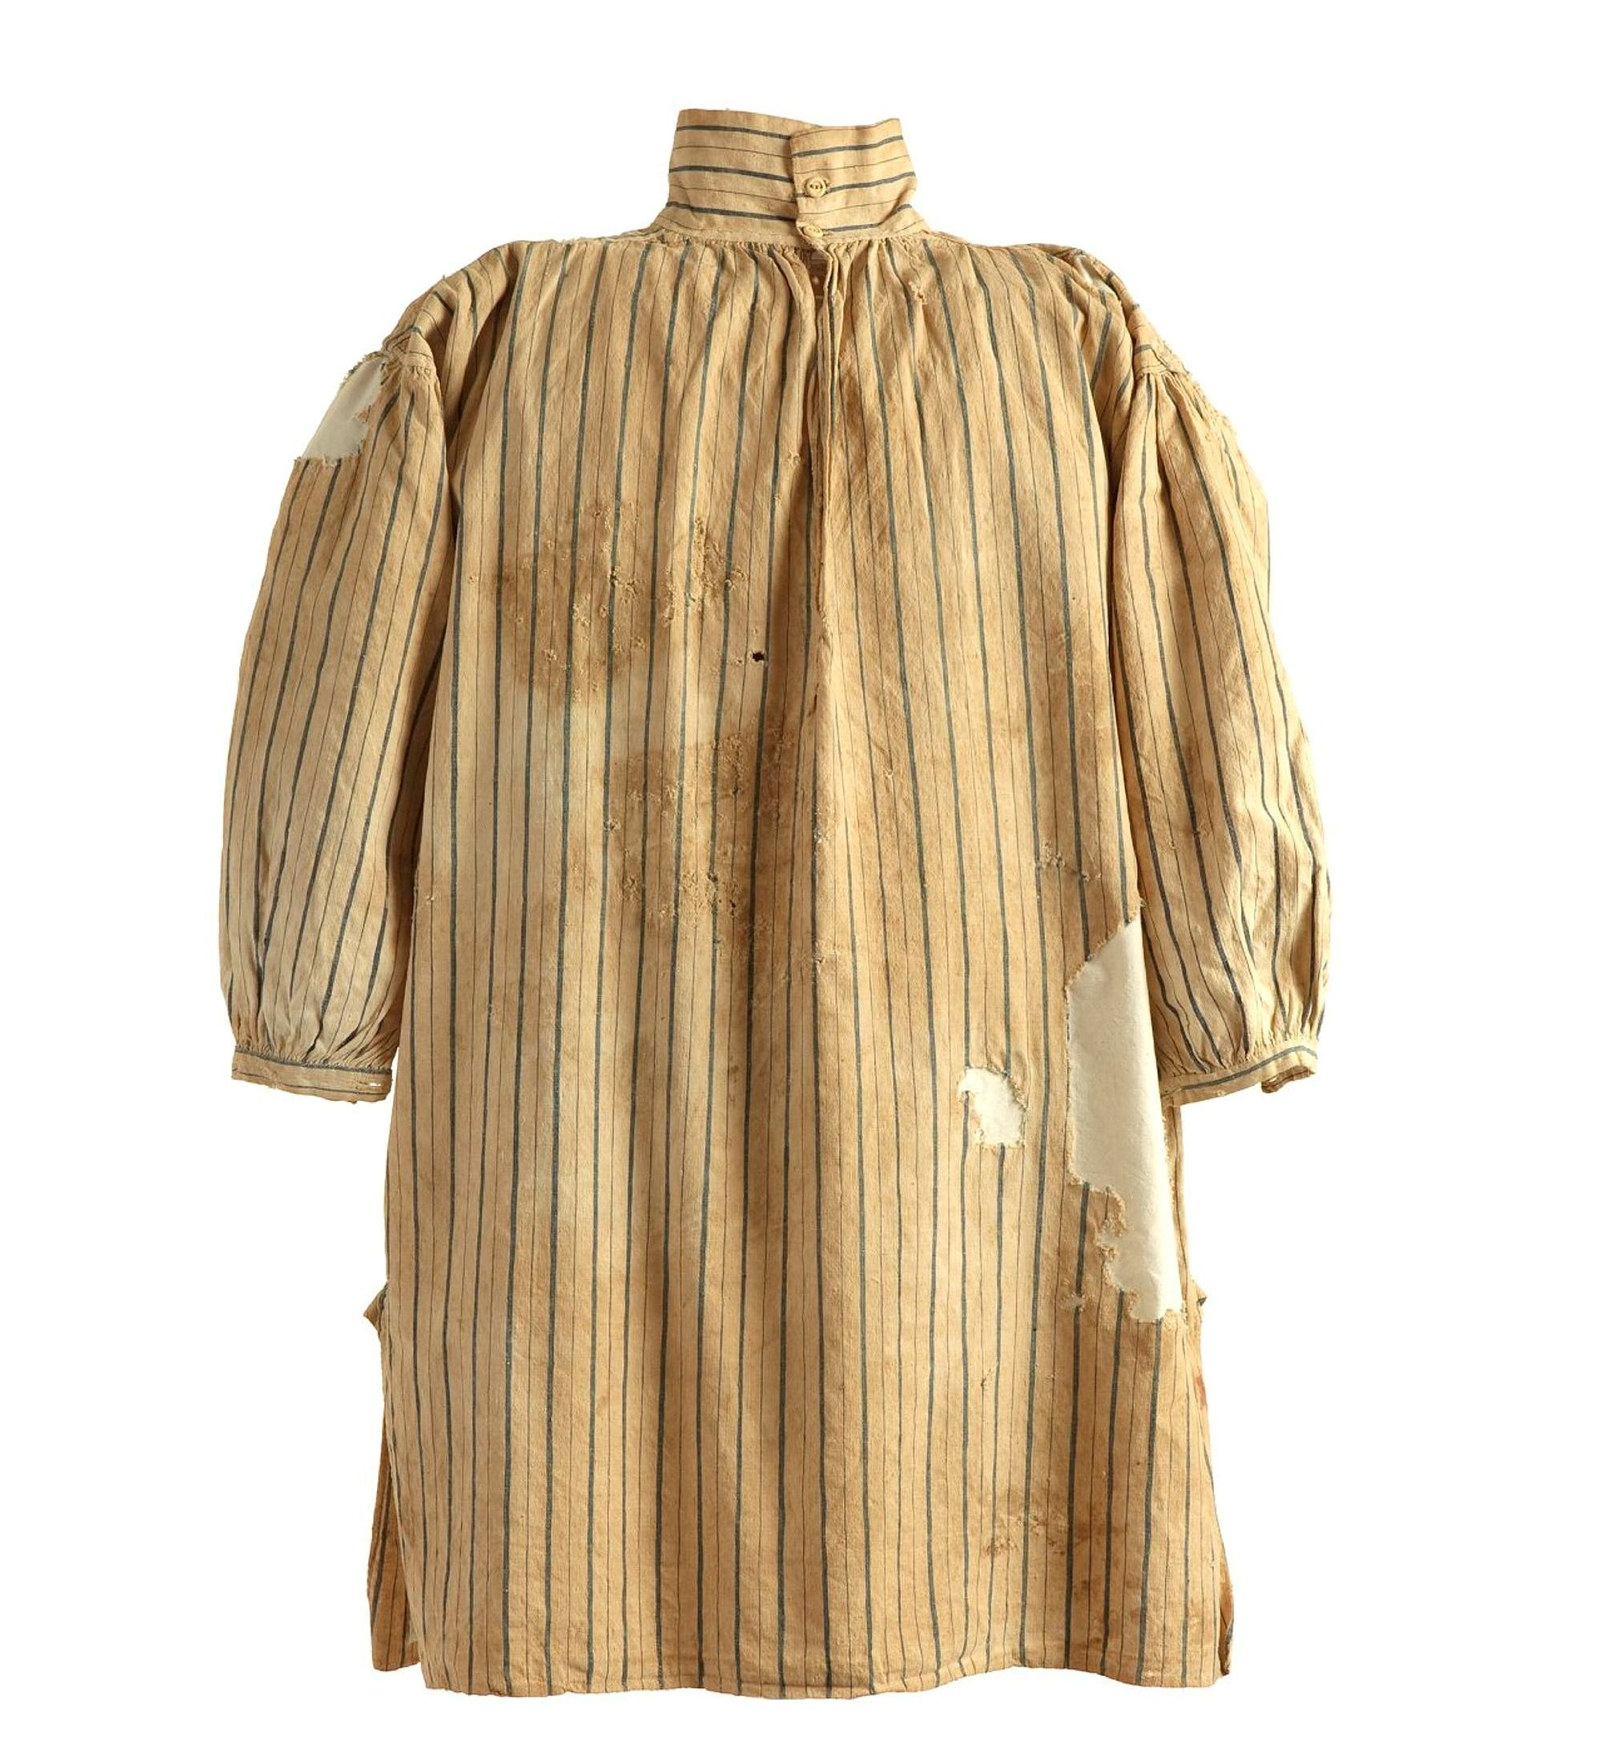 Old and faded blue and white striped cotton shirt